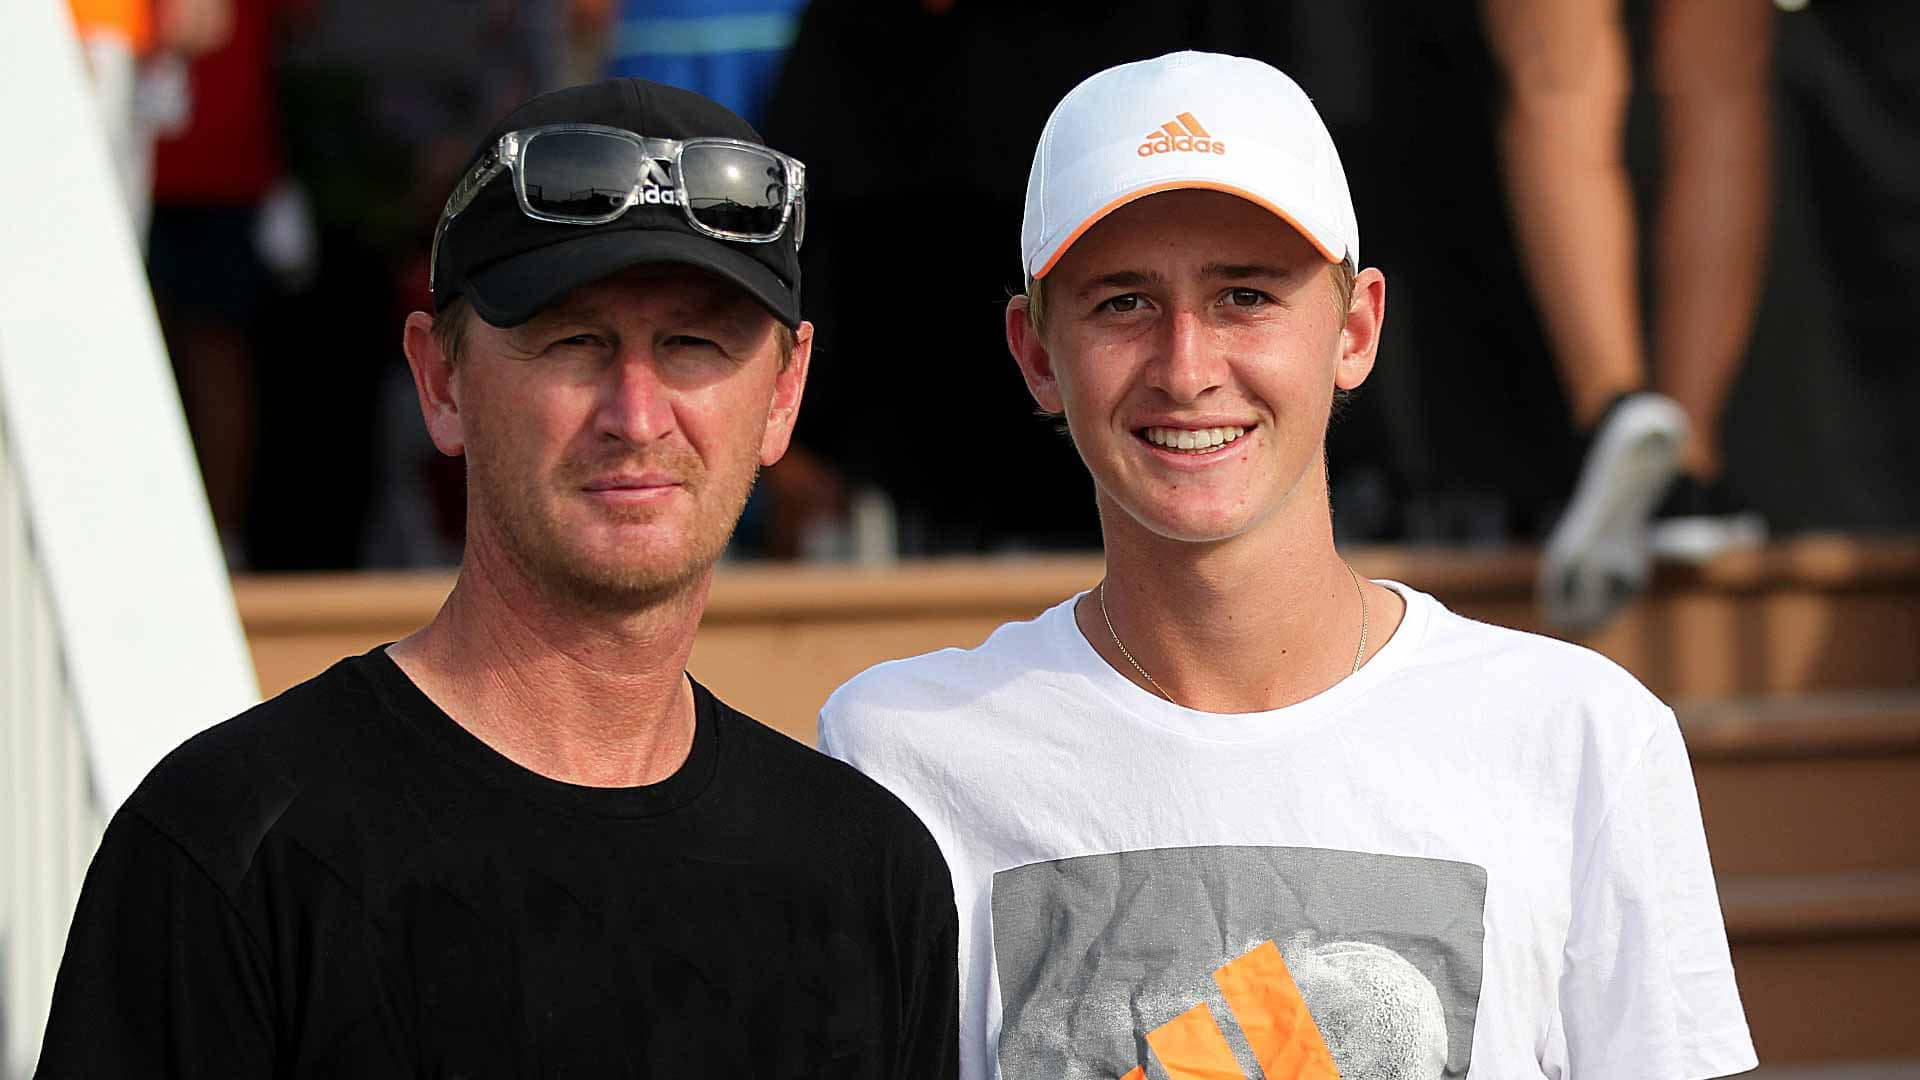 Petr Korda and his son bonding over their shared love for Tennis. Wallpaper